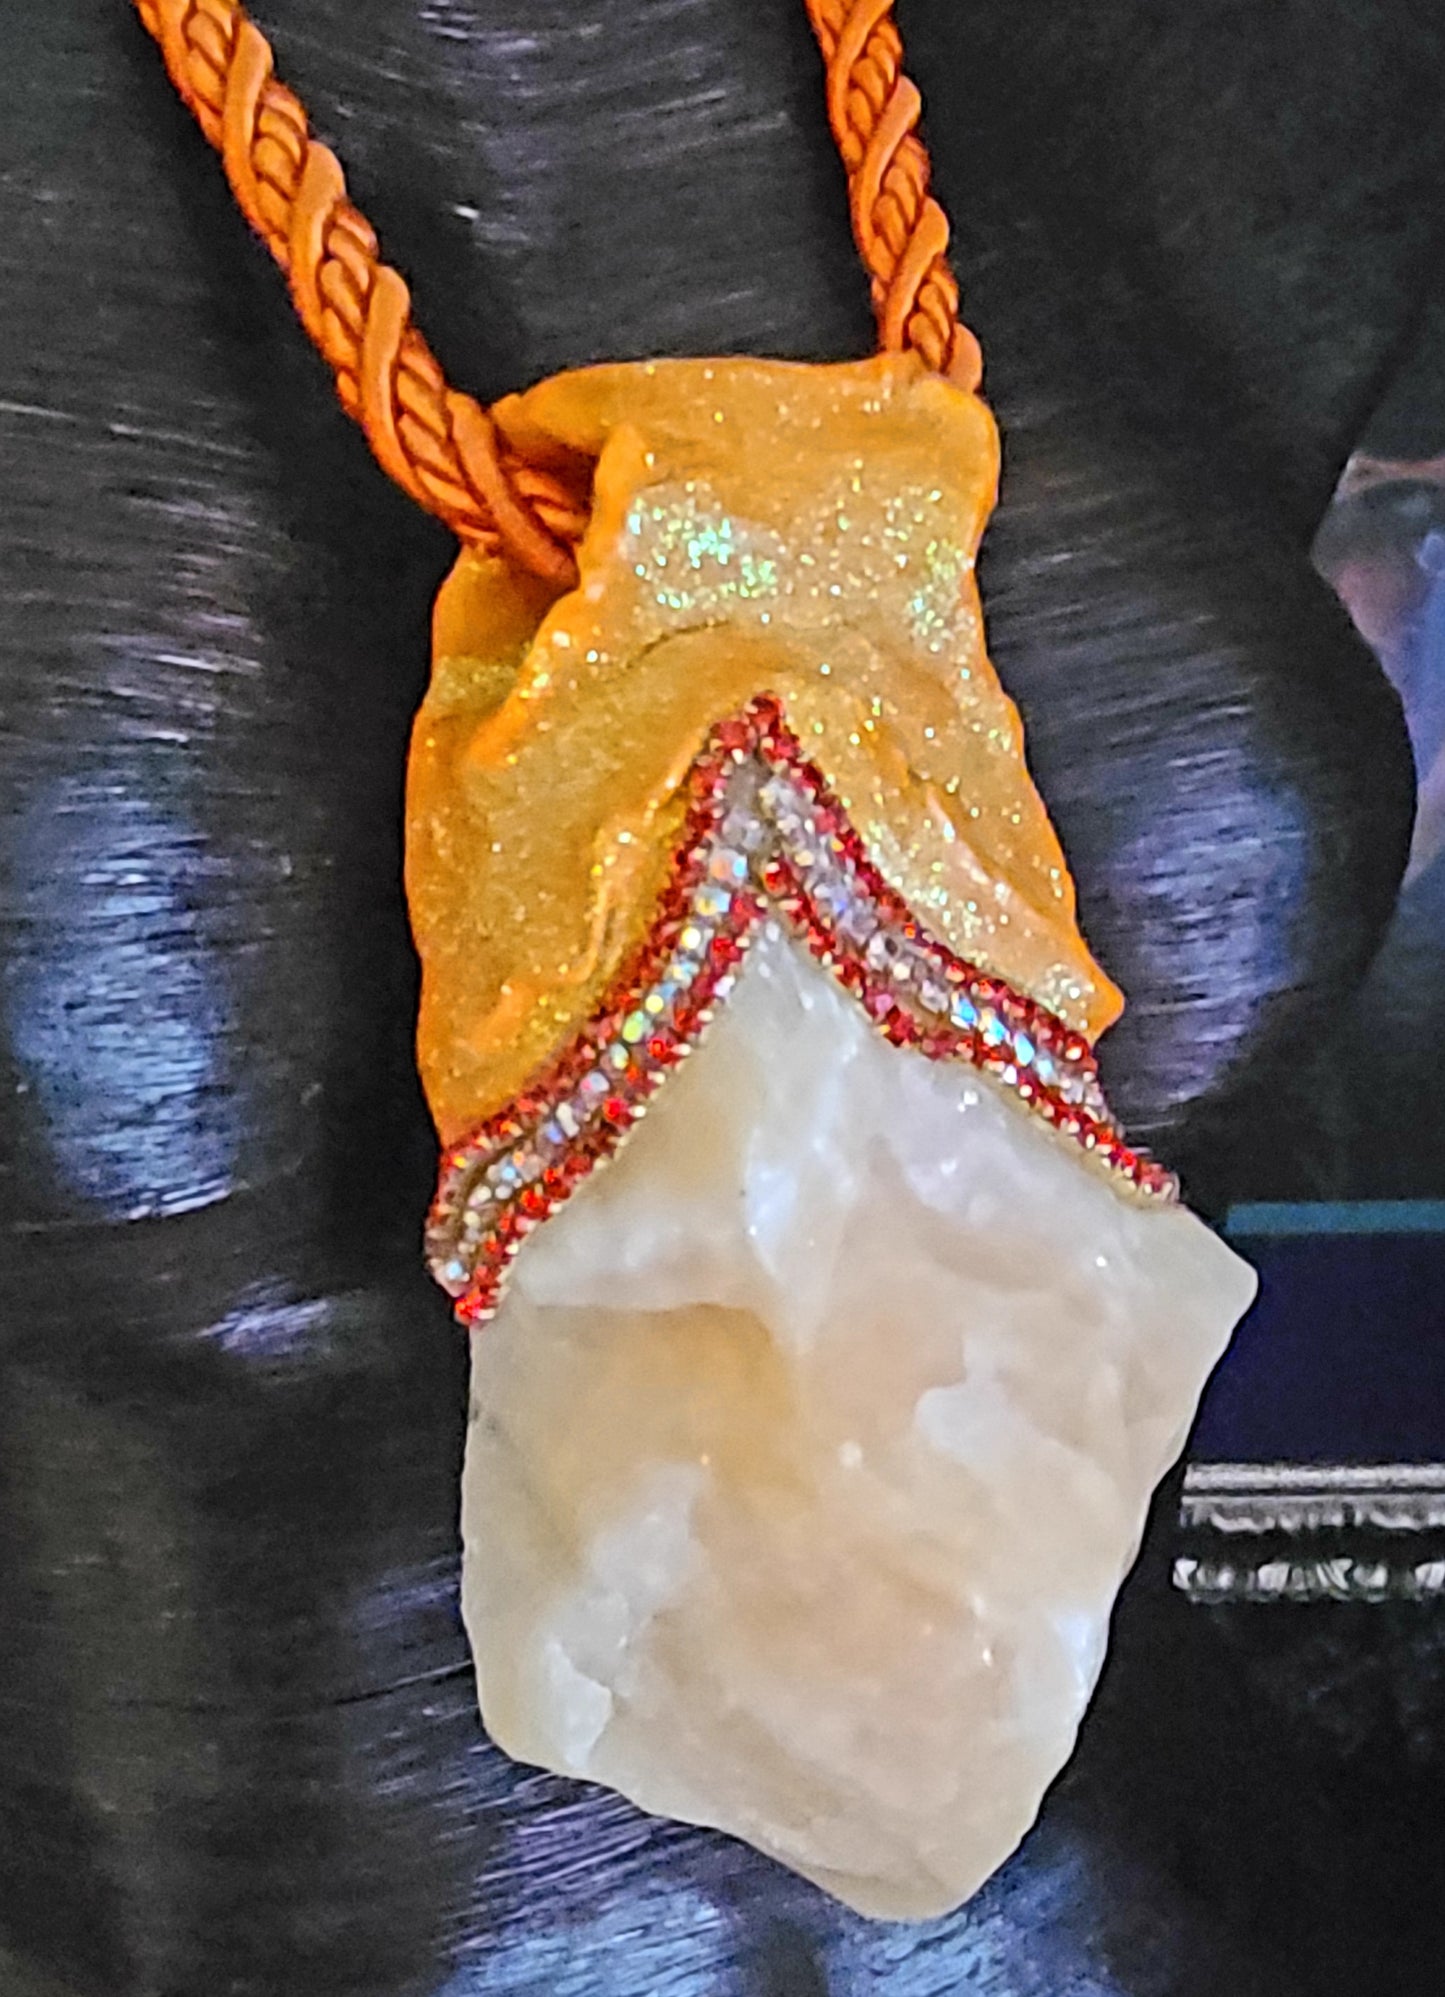 Pendant Gemstone Calcite Orange Yellow Red, Talisman Crystal Rough Raw People of Color, Jewelry Autumn